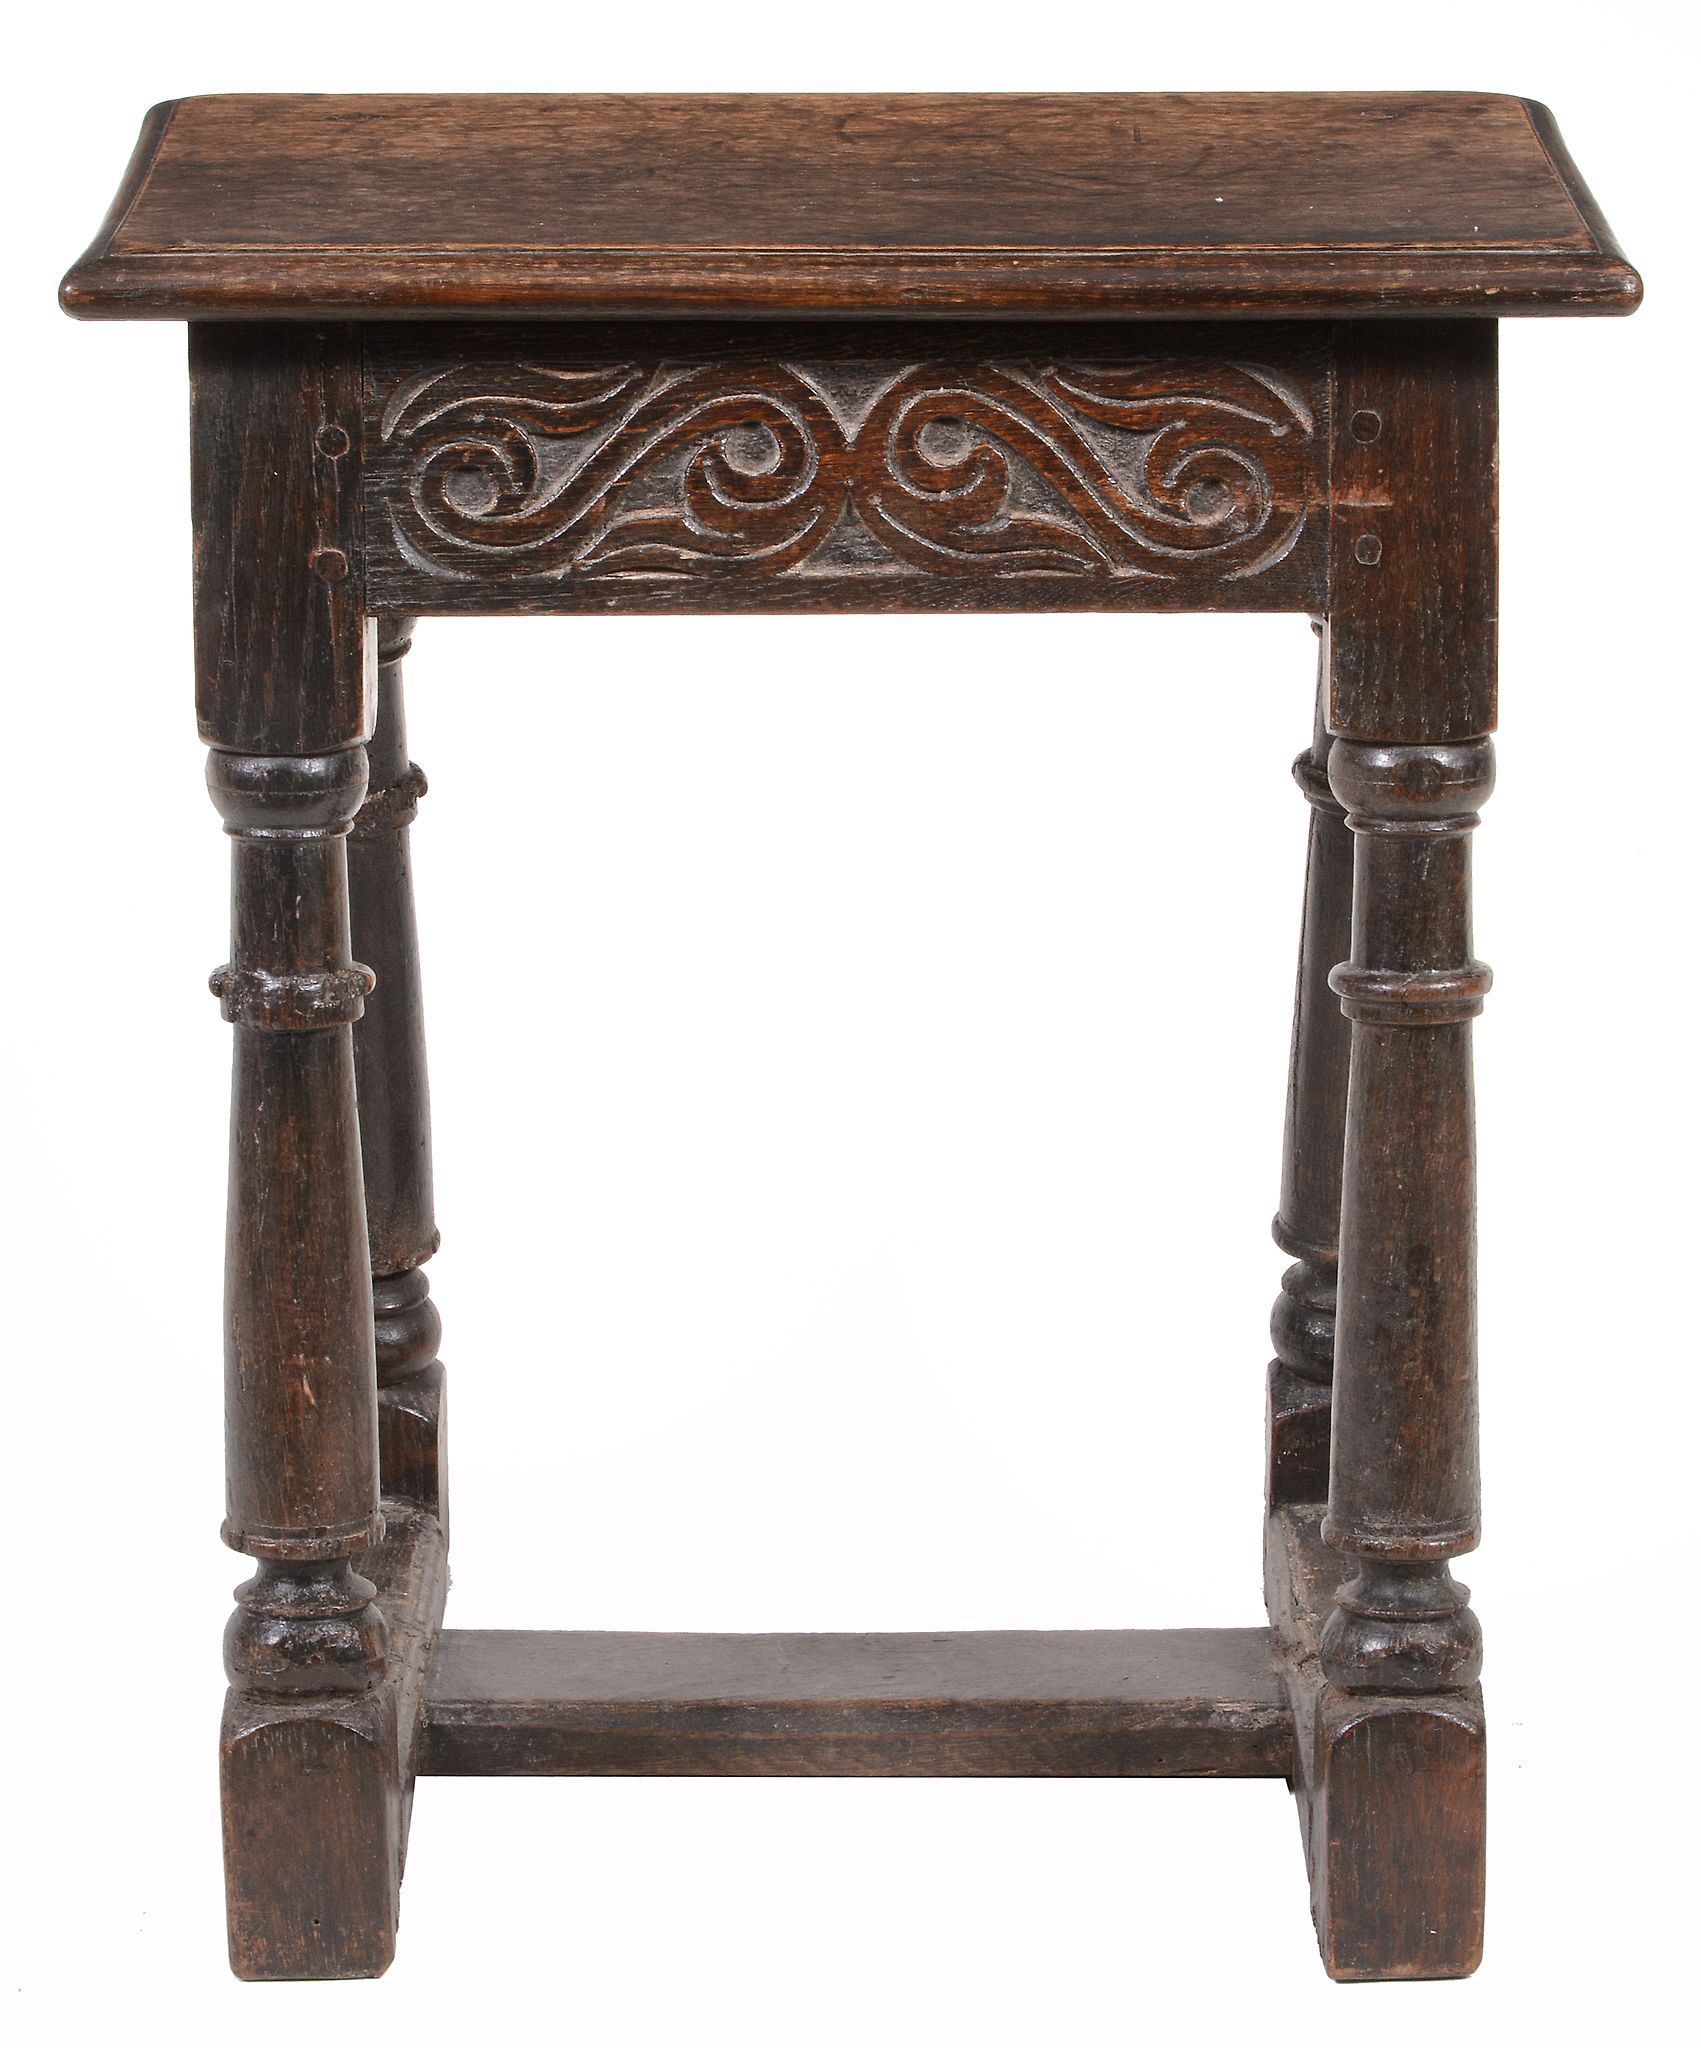 A Charles II oak joint stool  , circa 1660, the seat with moulded edge above a freize with scroll - Image 2 of 2